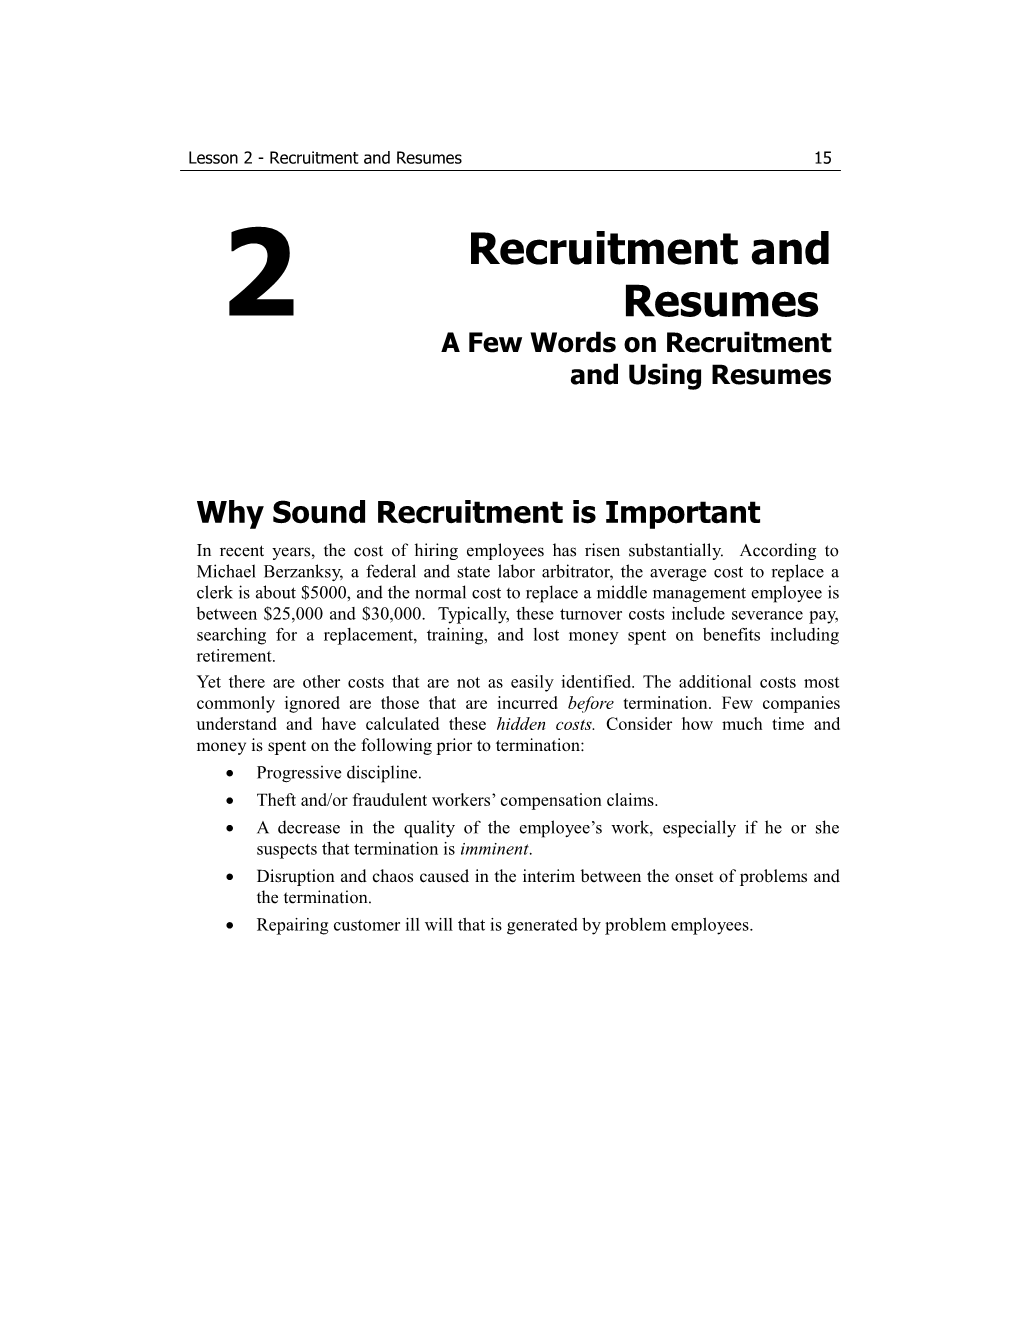 Why Sound Recruitment Is Important